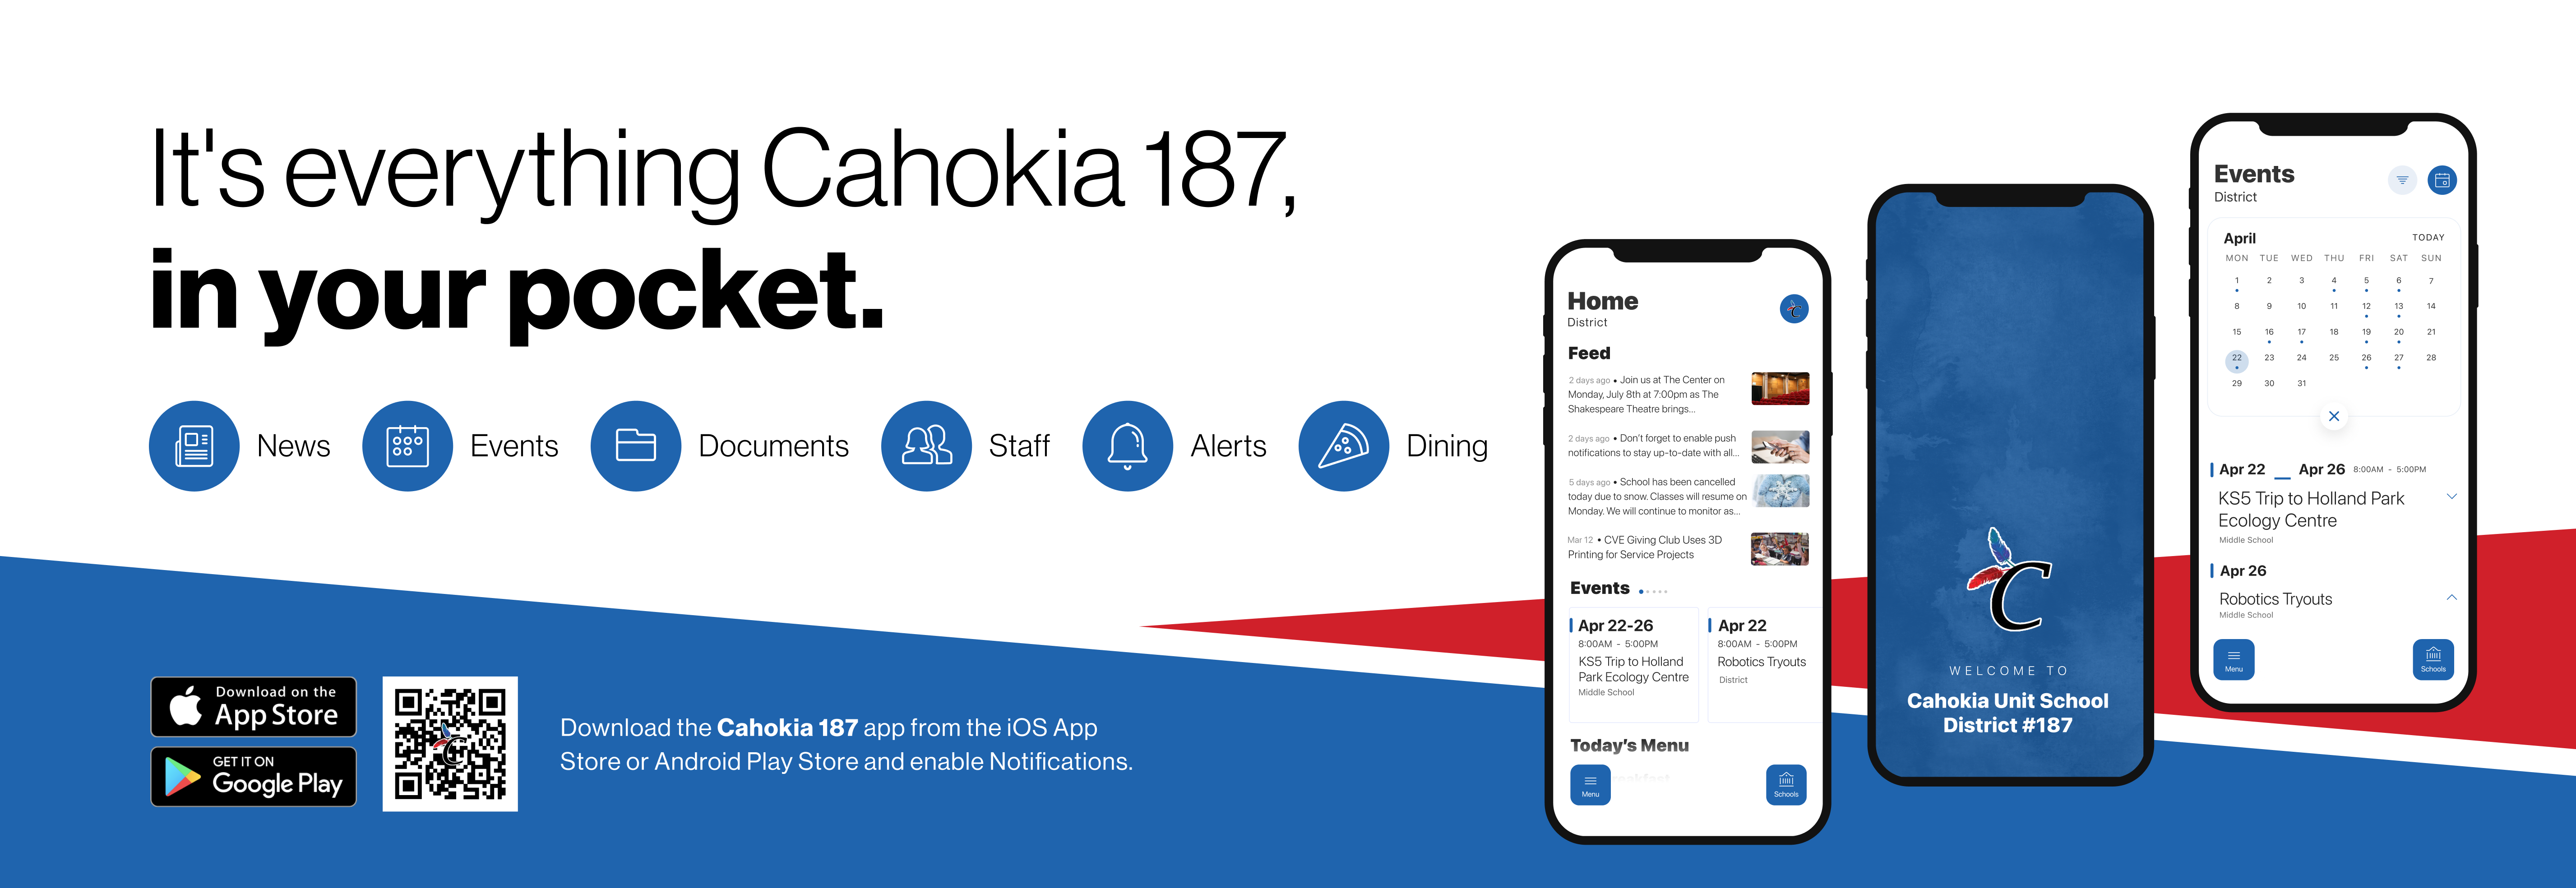 a flyer for the new district app with a QR code in the lower left: It's everything Cahokia 187, in your pocket